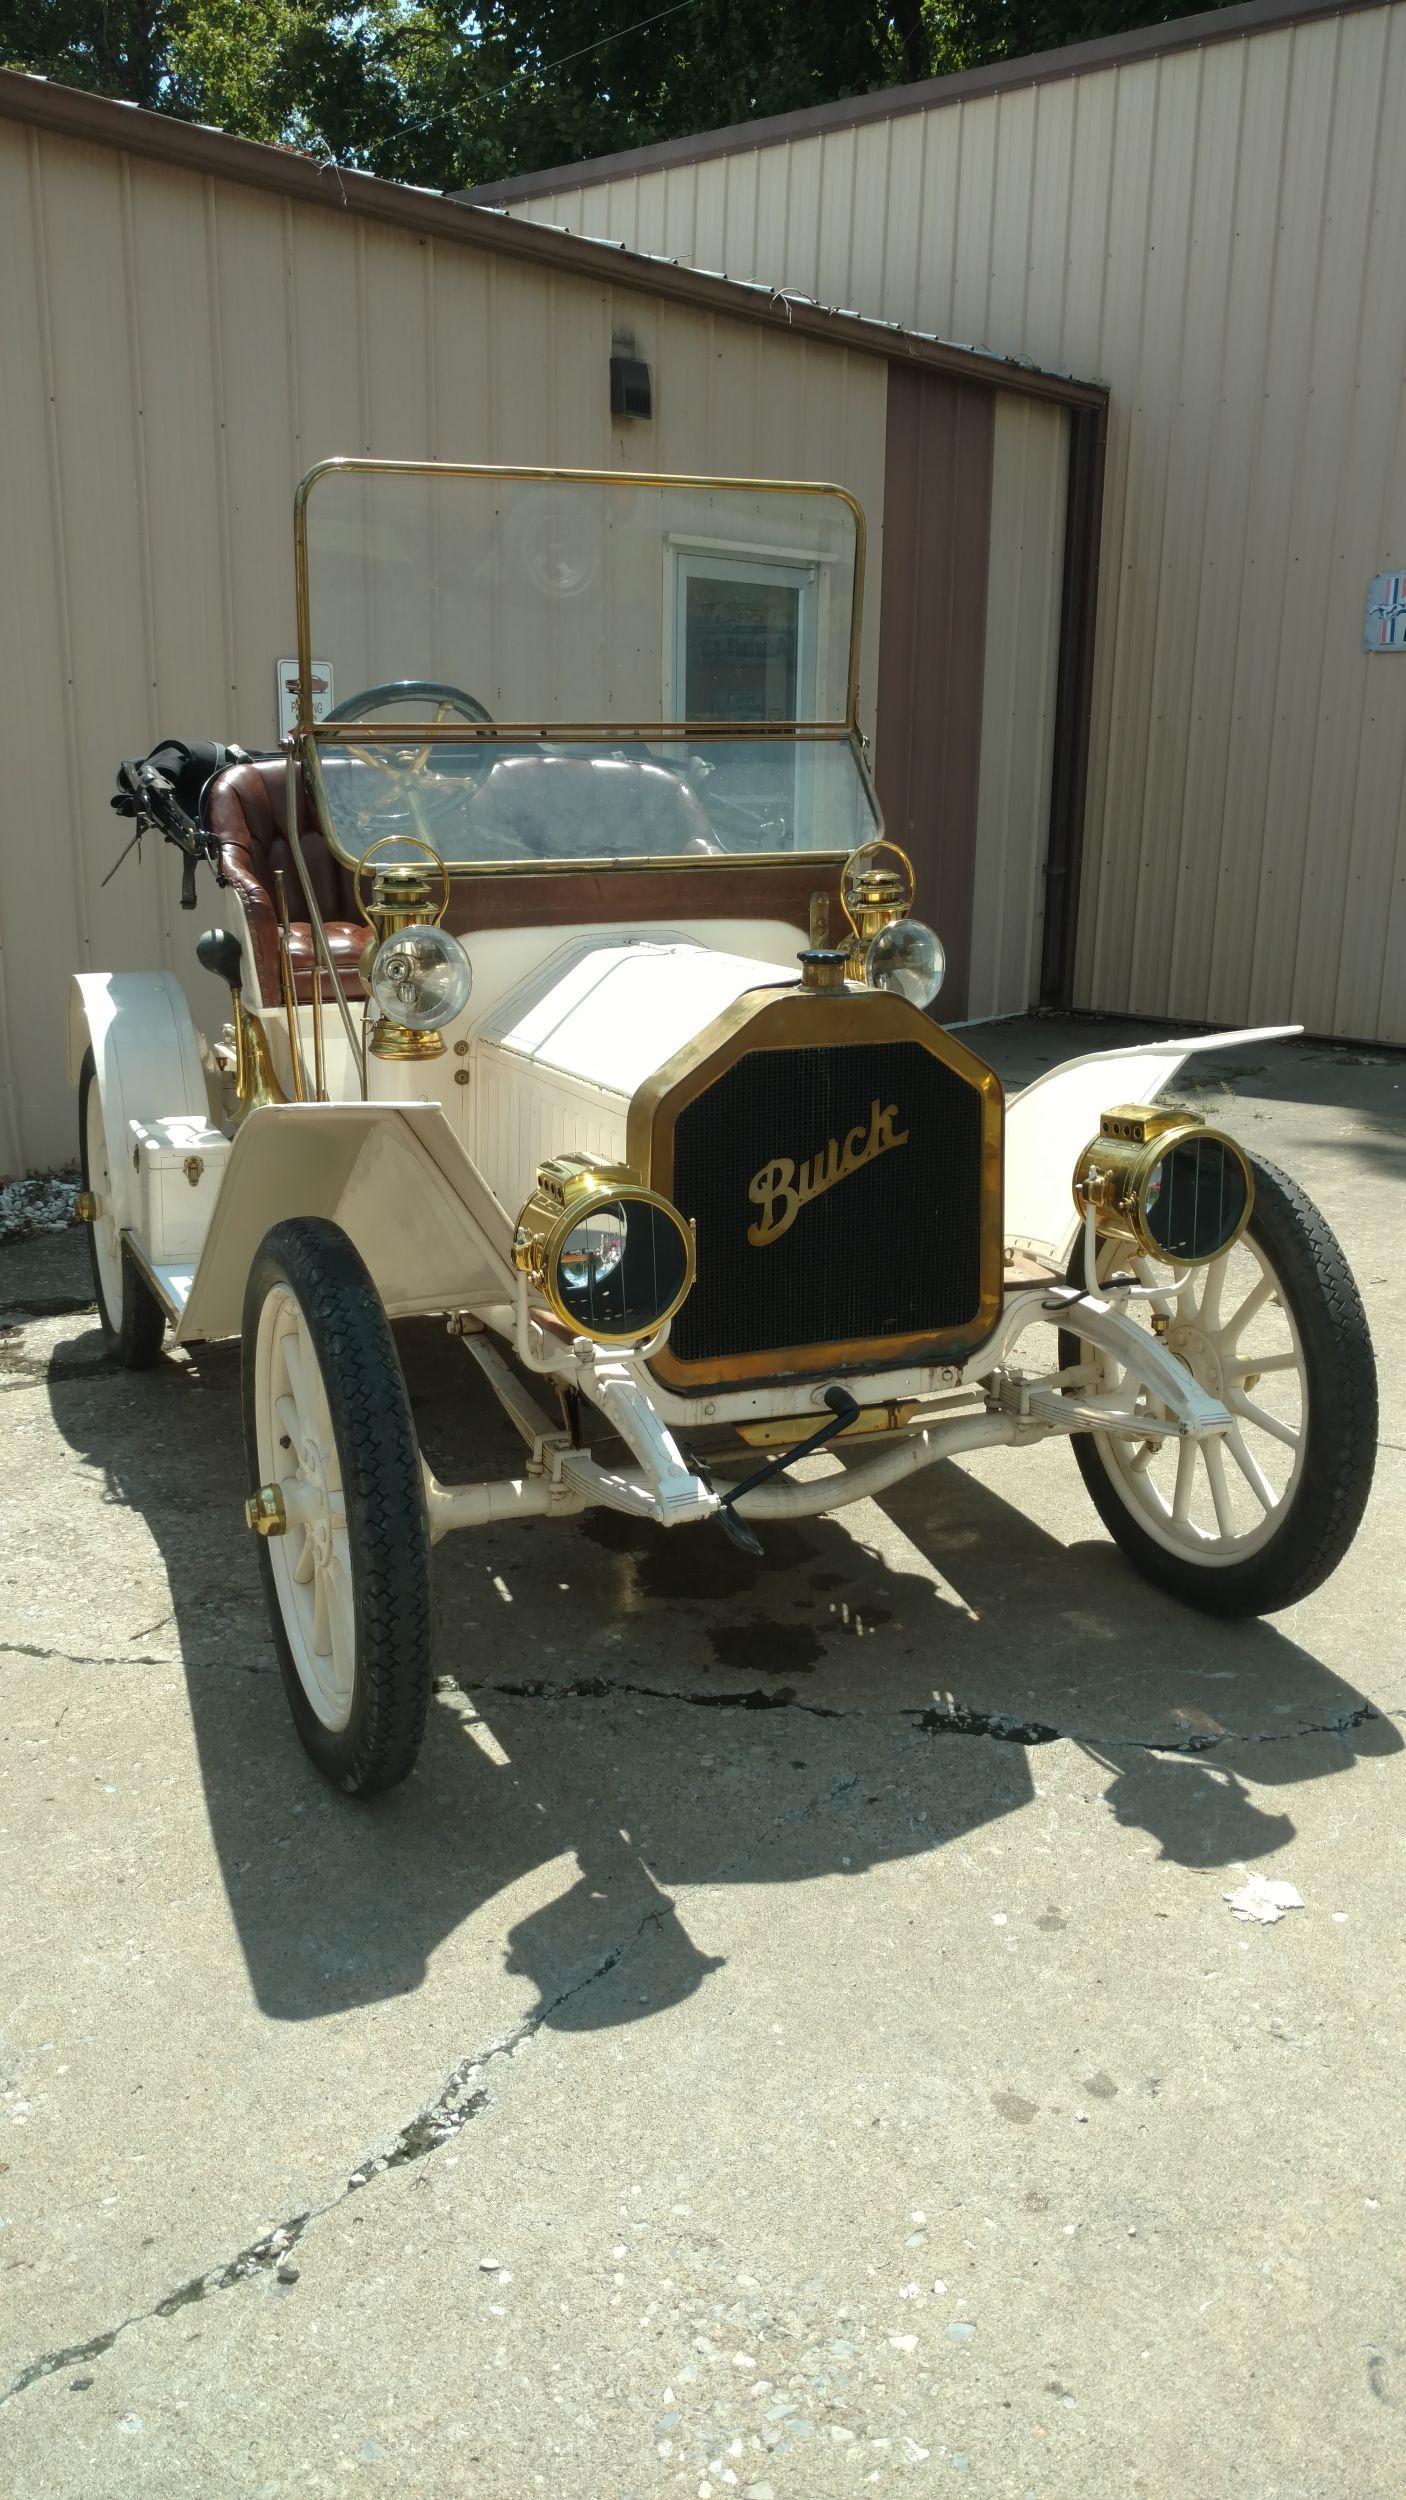 1908 Buick Model 10 Touring Roadster